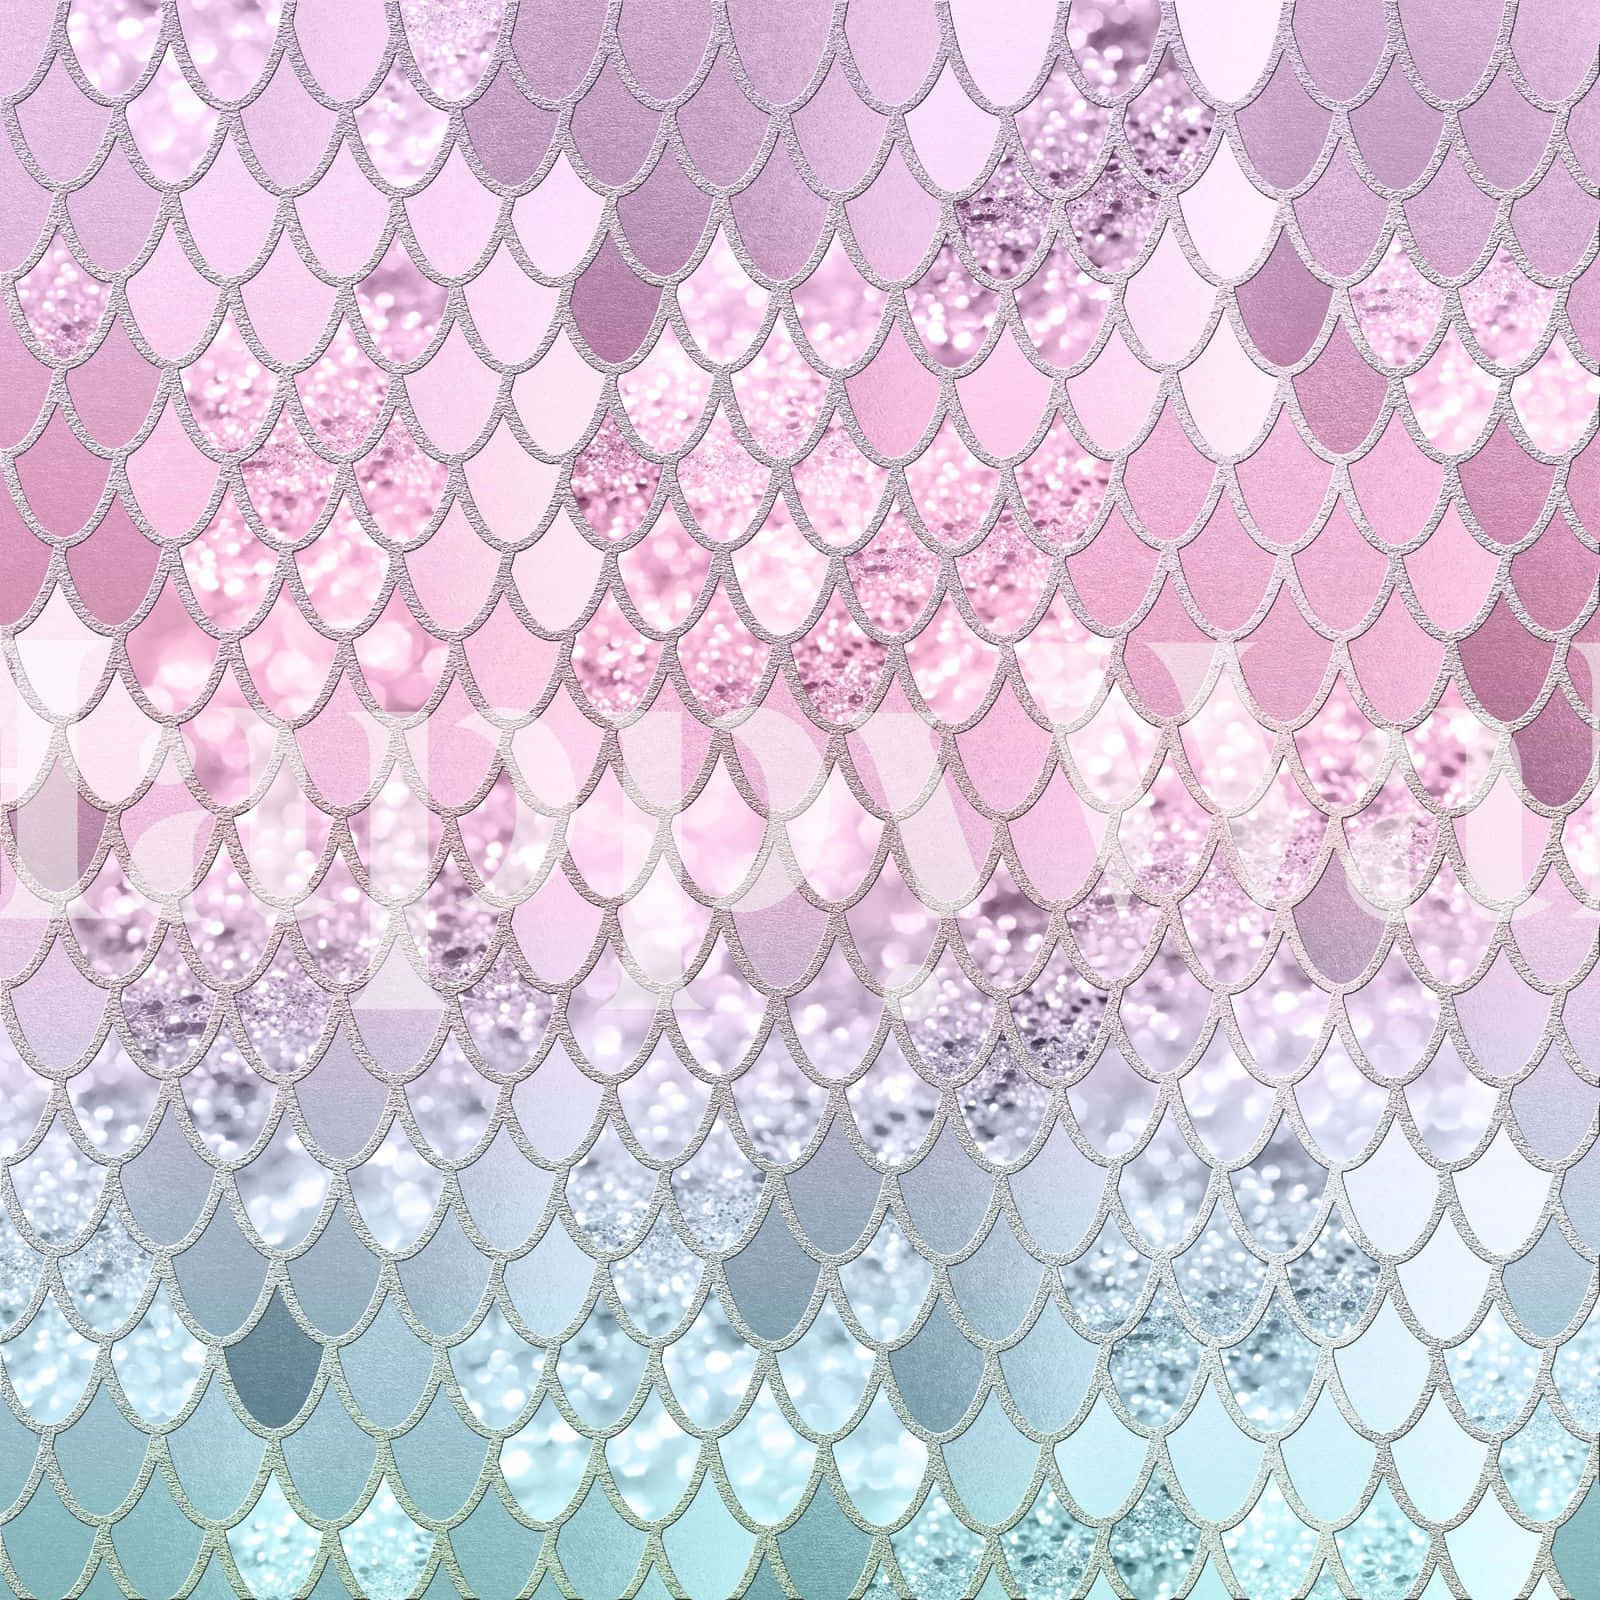 Download A Pink And Blue Mermaid Scales Background Wallpaper | Wallpapers .com